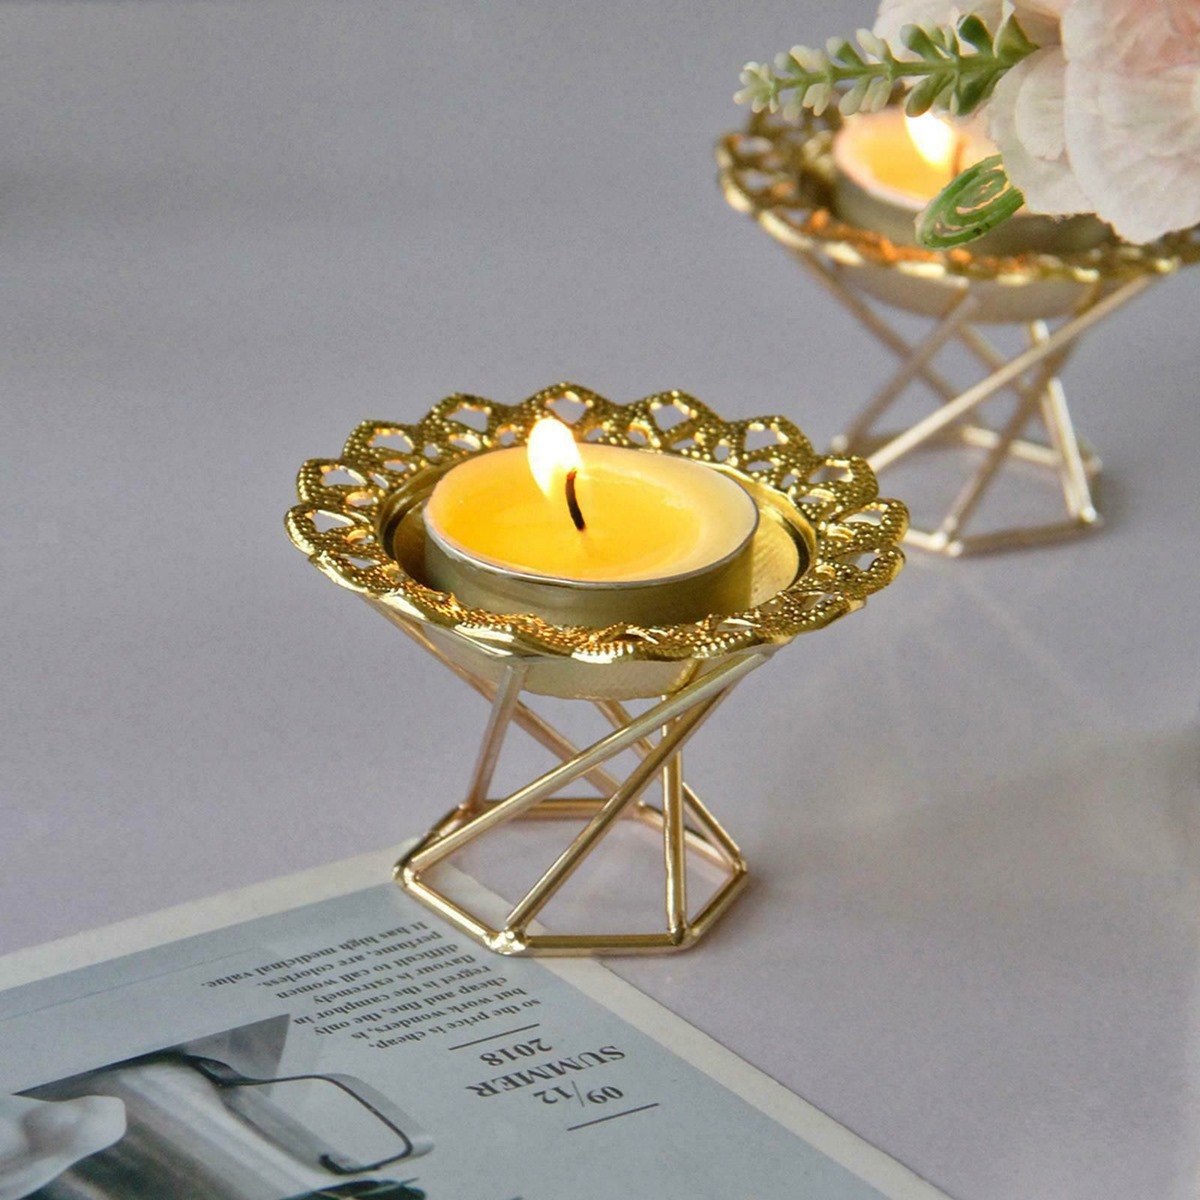 What Is A Candle Holder Called